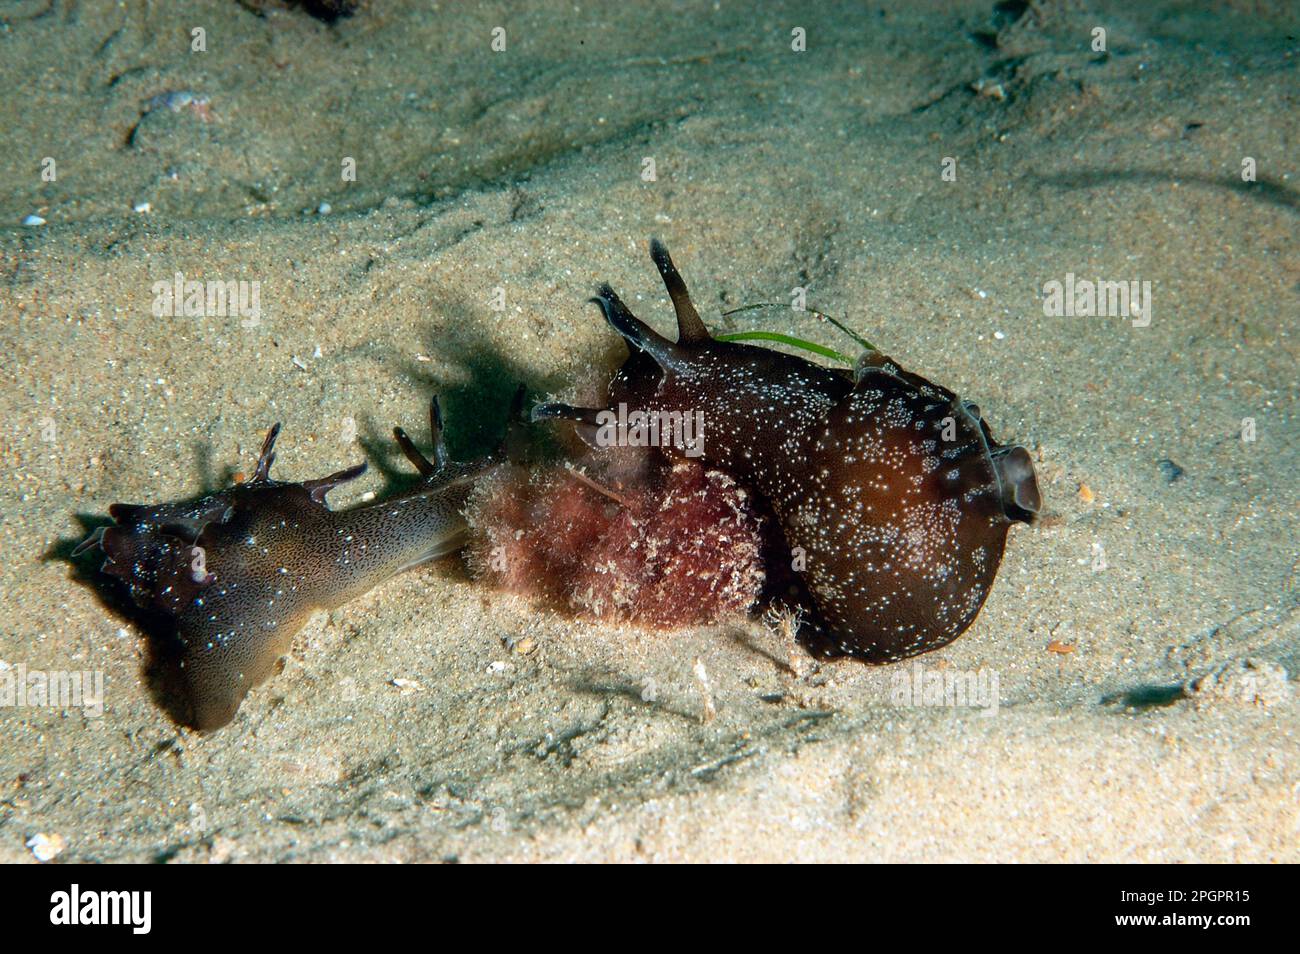 Spotted sea-hare, Spotted sea-hares, Other animals, Sea snails, Snails, Animals, Molluscs, Sea-hare (Aplysia punctata) two adults, on sandy seabed Stock Photo